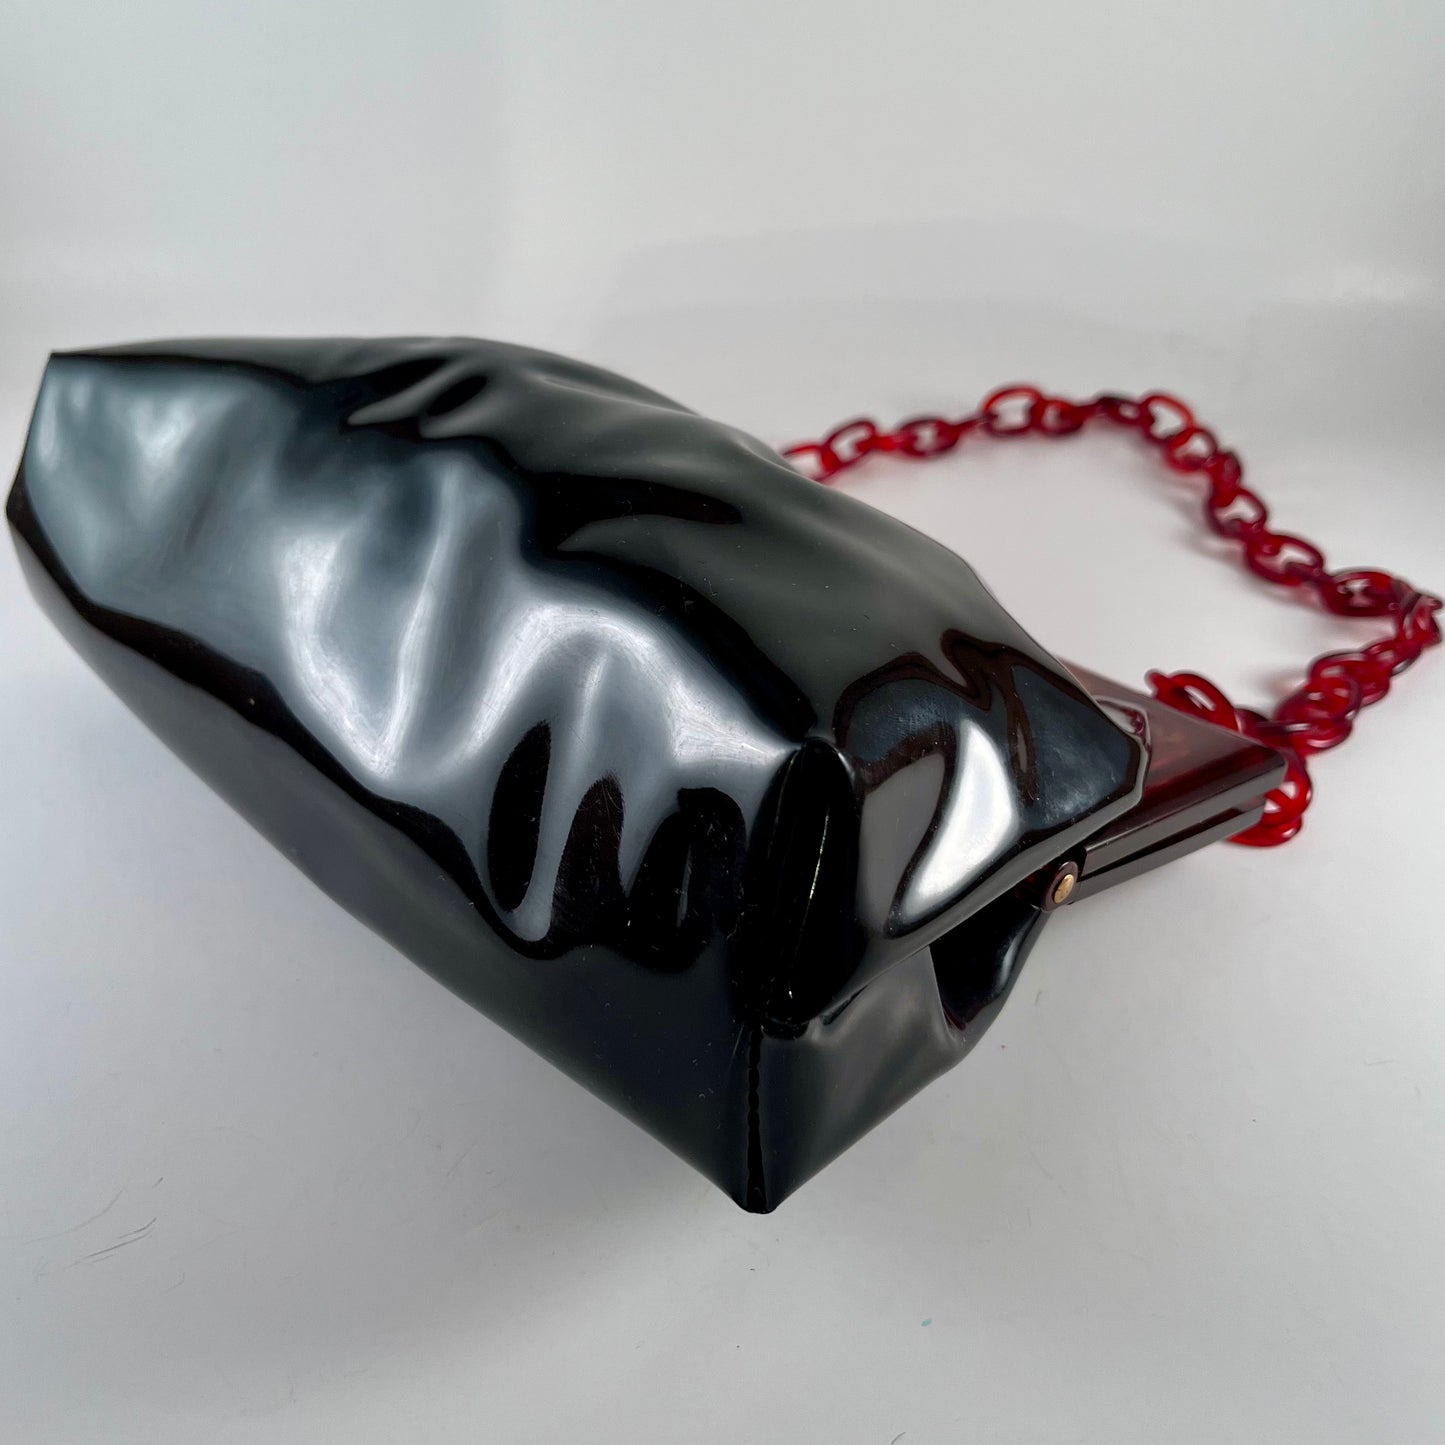 Late 50s/ Early 60s Patent Leather and Lucite Handbag